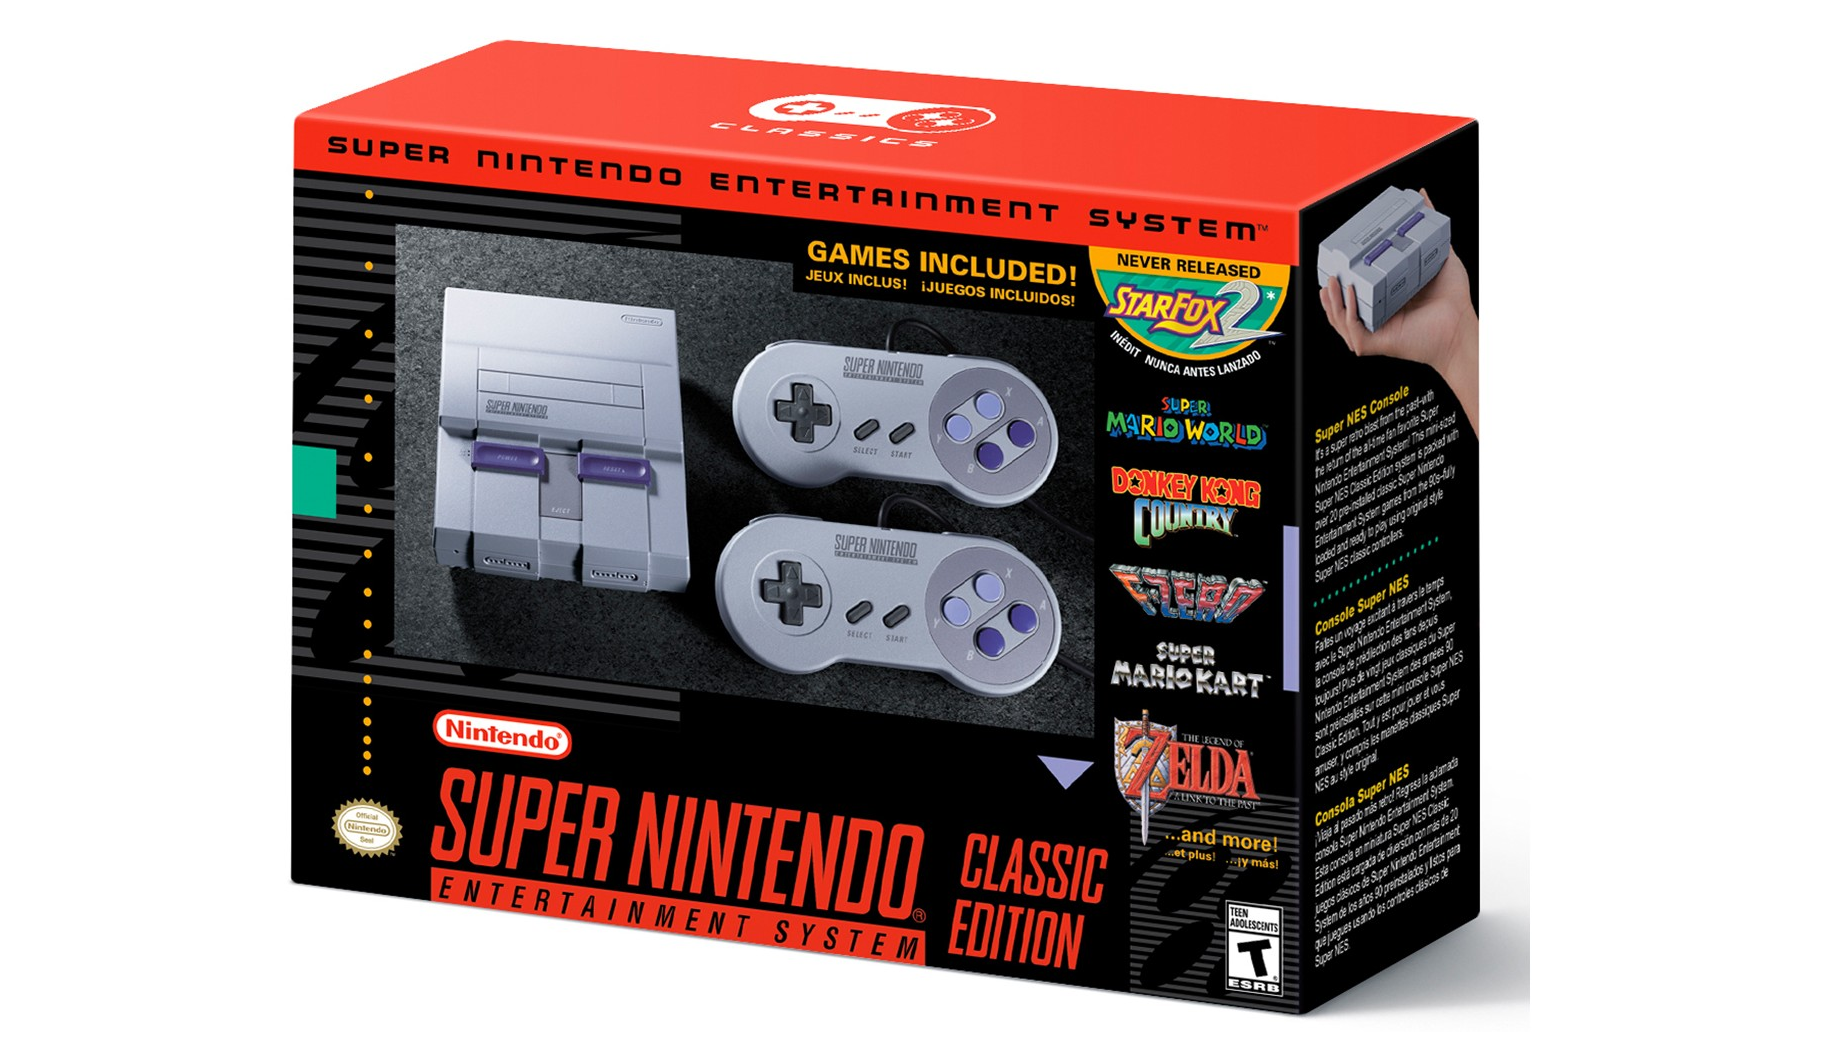 Nintendo Super NES Classic Edition Only $75.99 for Target REDcard Members!